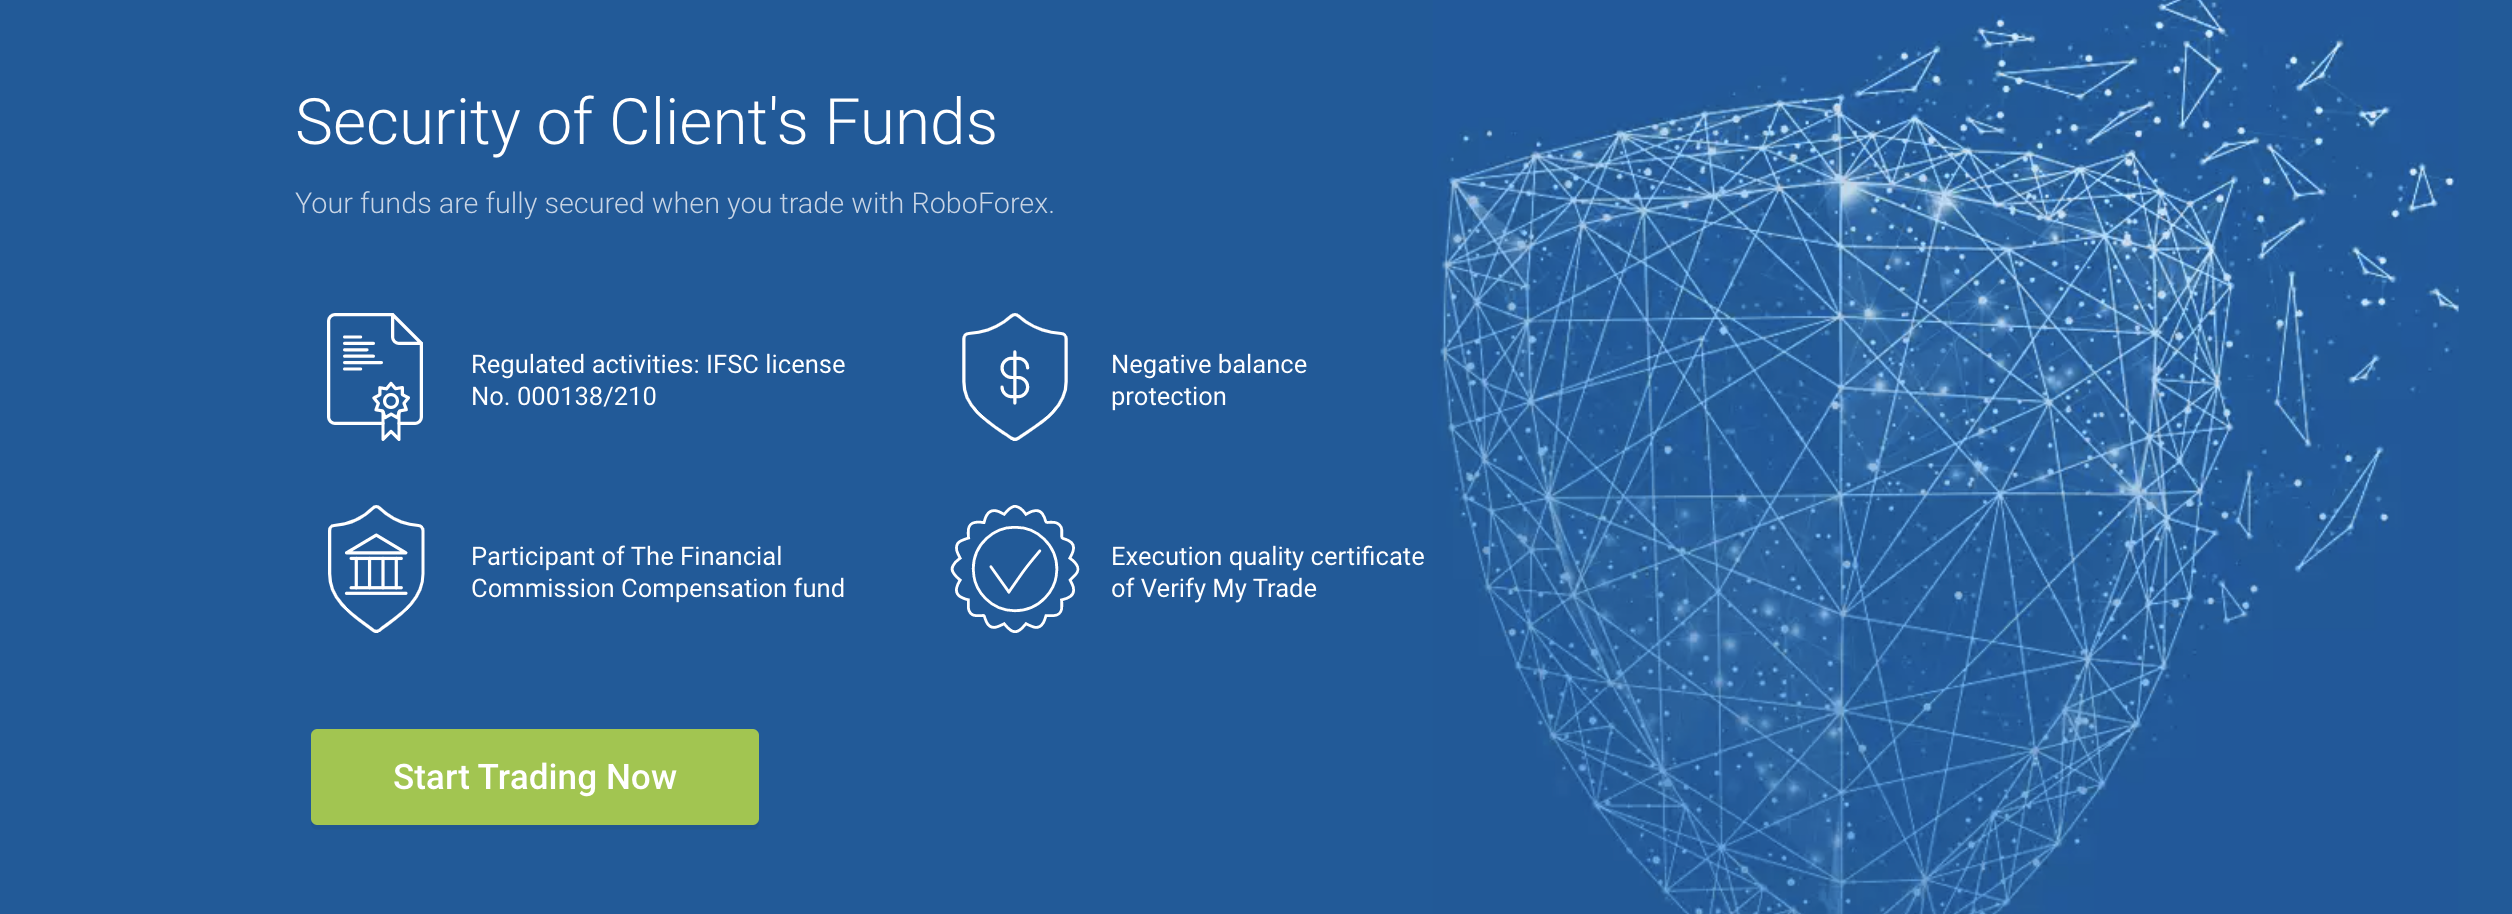 Secure trading with RoboForex